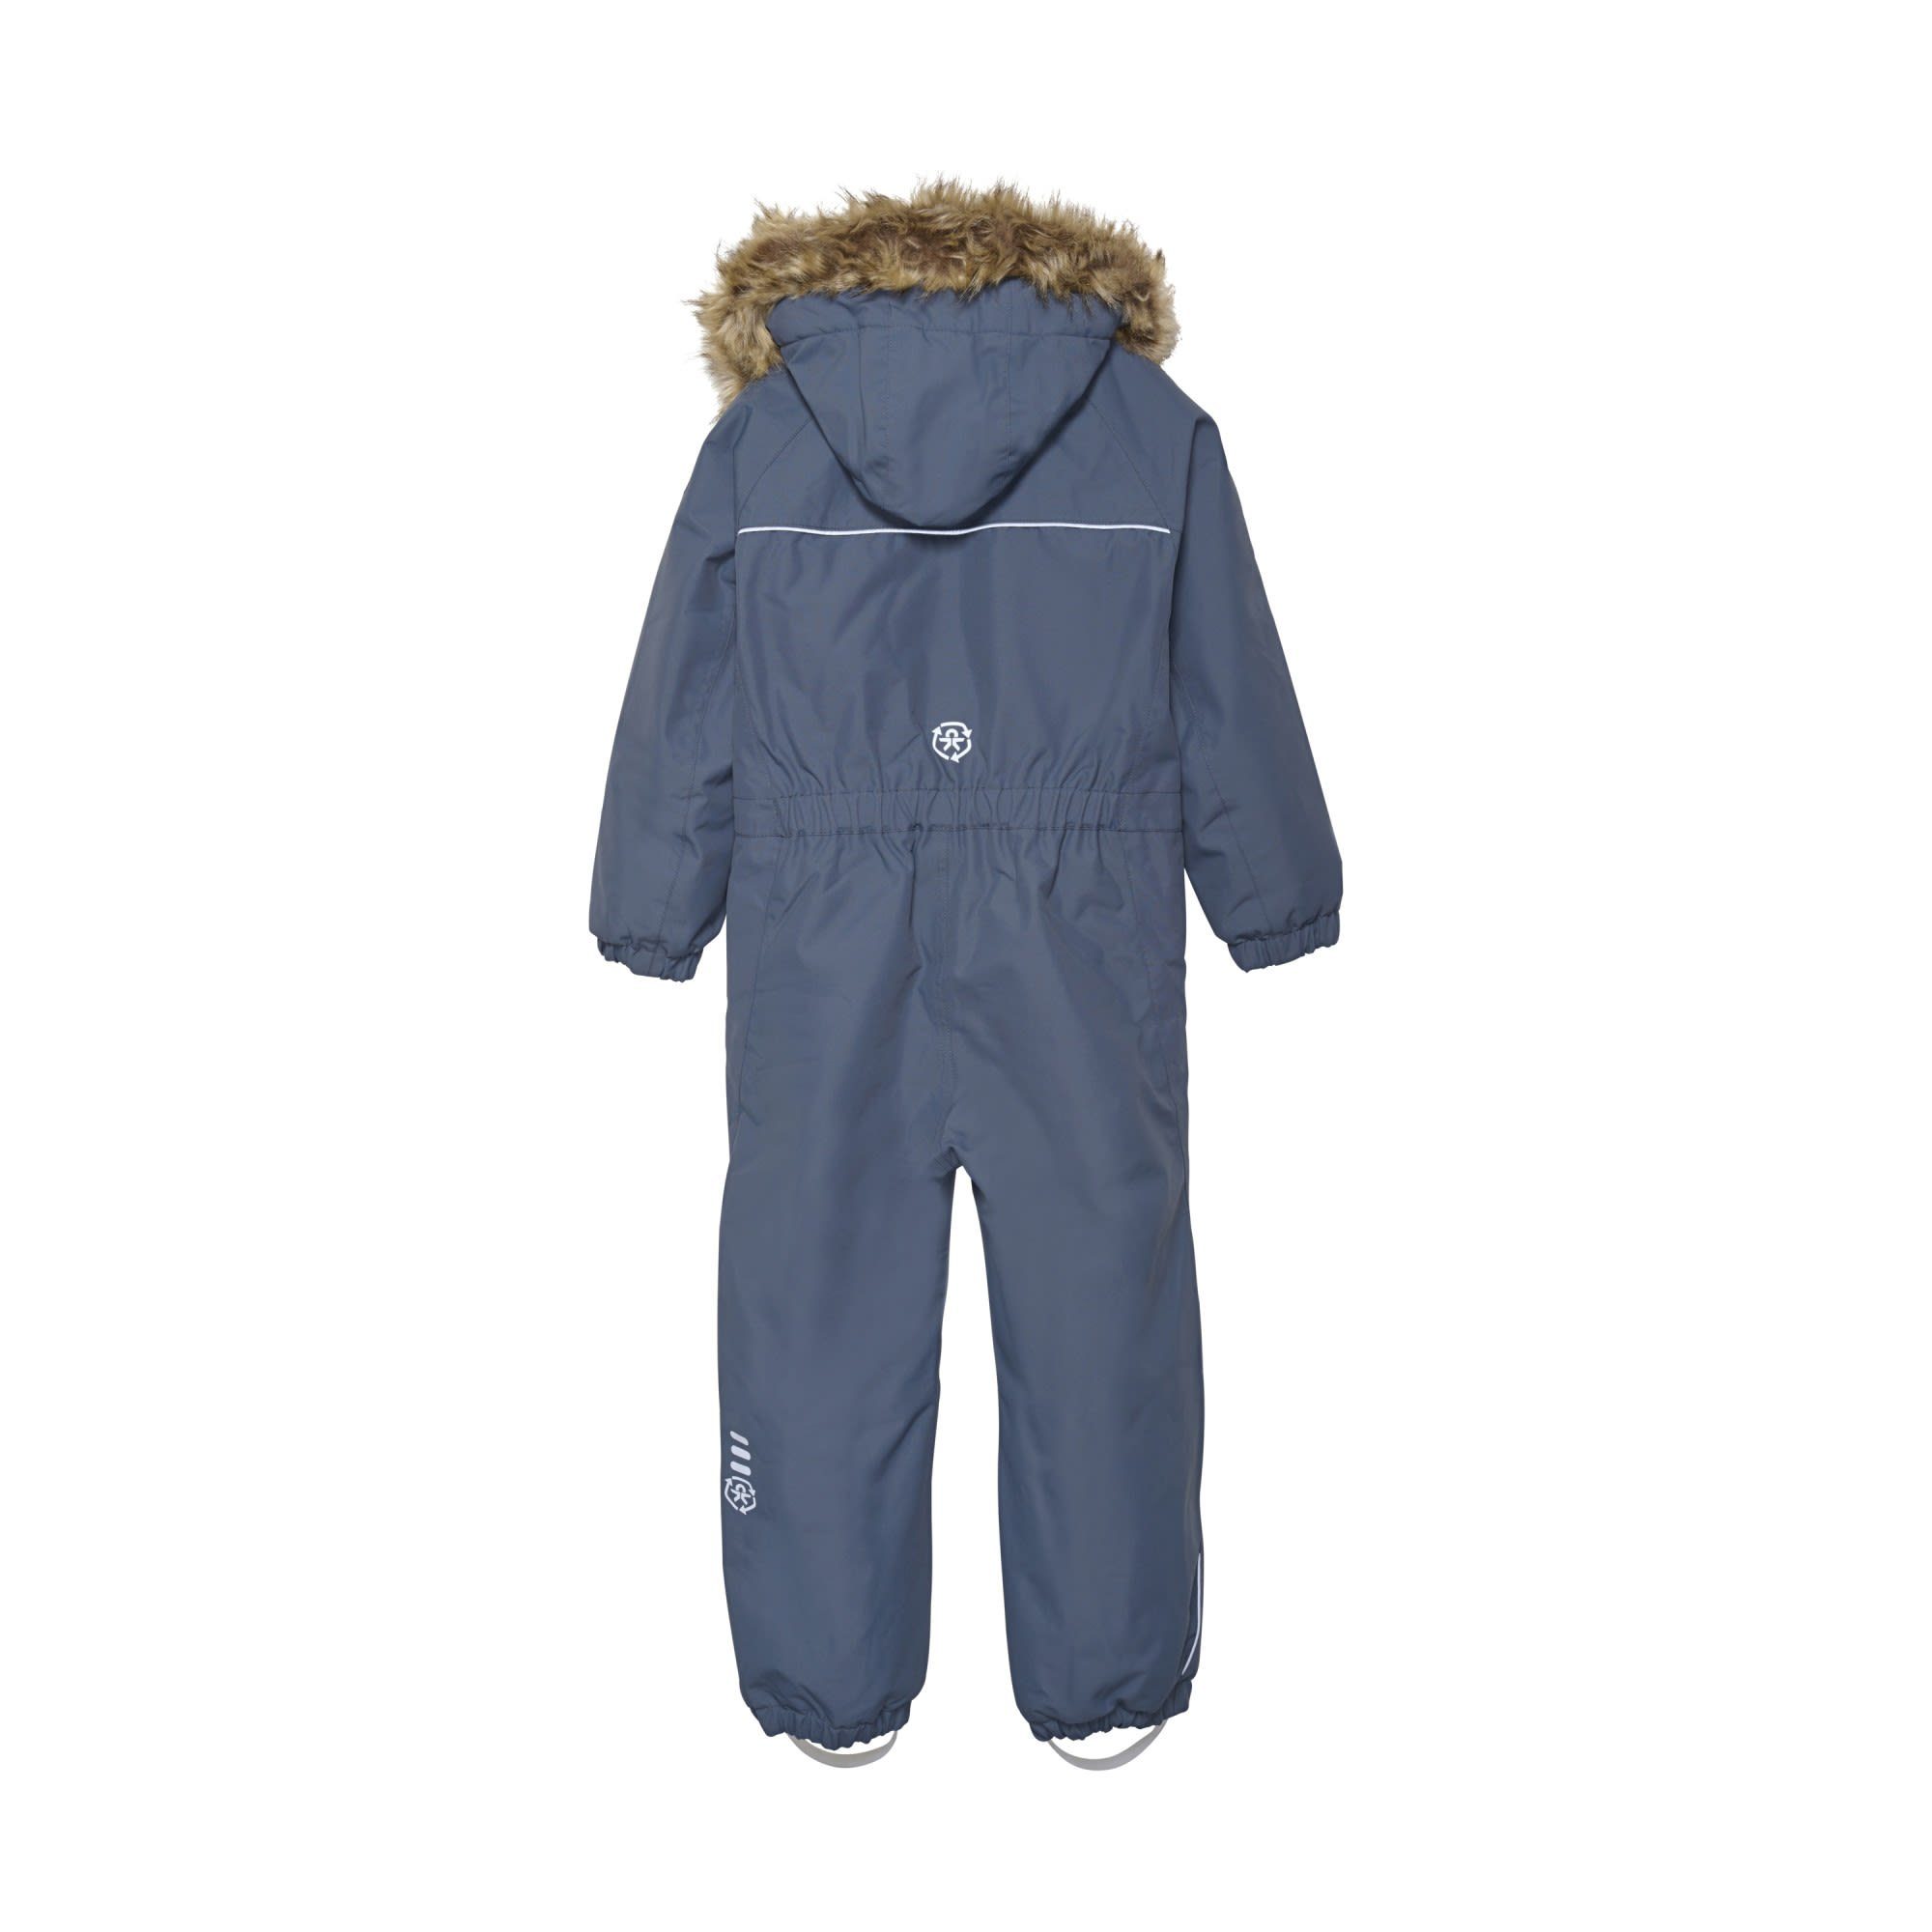 Fur Coverall Overall COLOR Fake Kinder KIDS With Color Kids Turbulence Kids